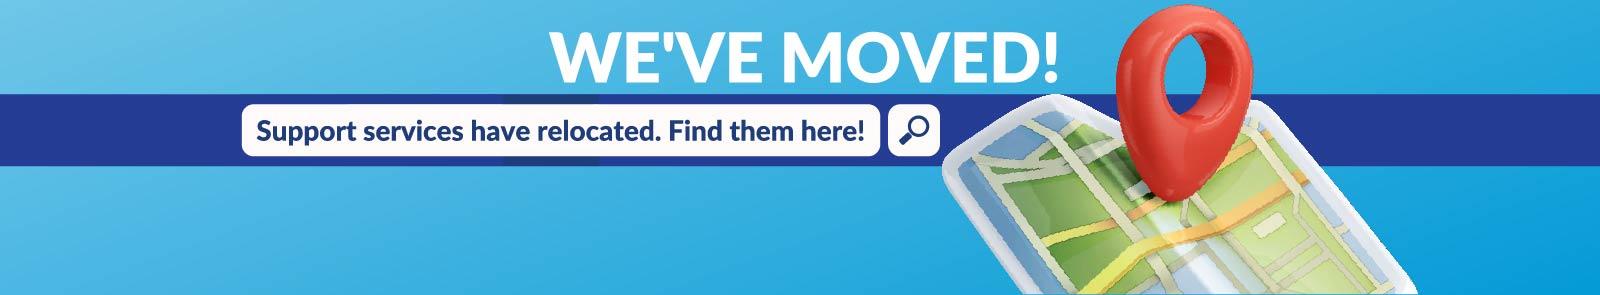 We’ve Moved! Support services have relocated. Find them here!